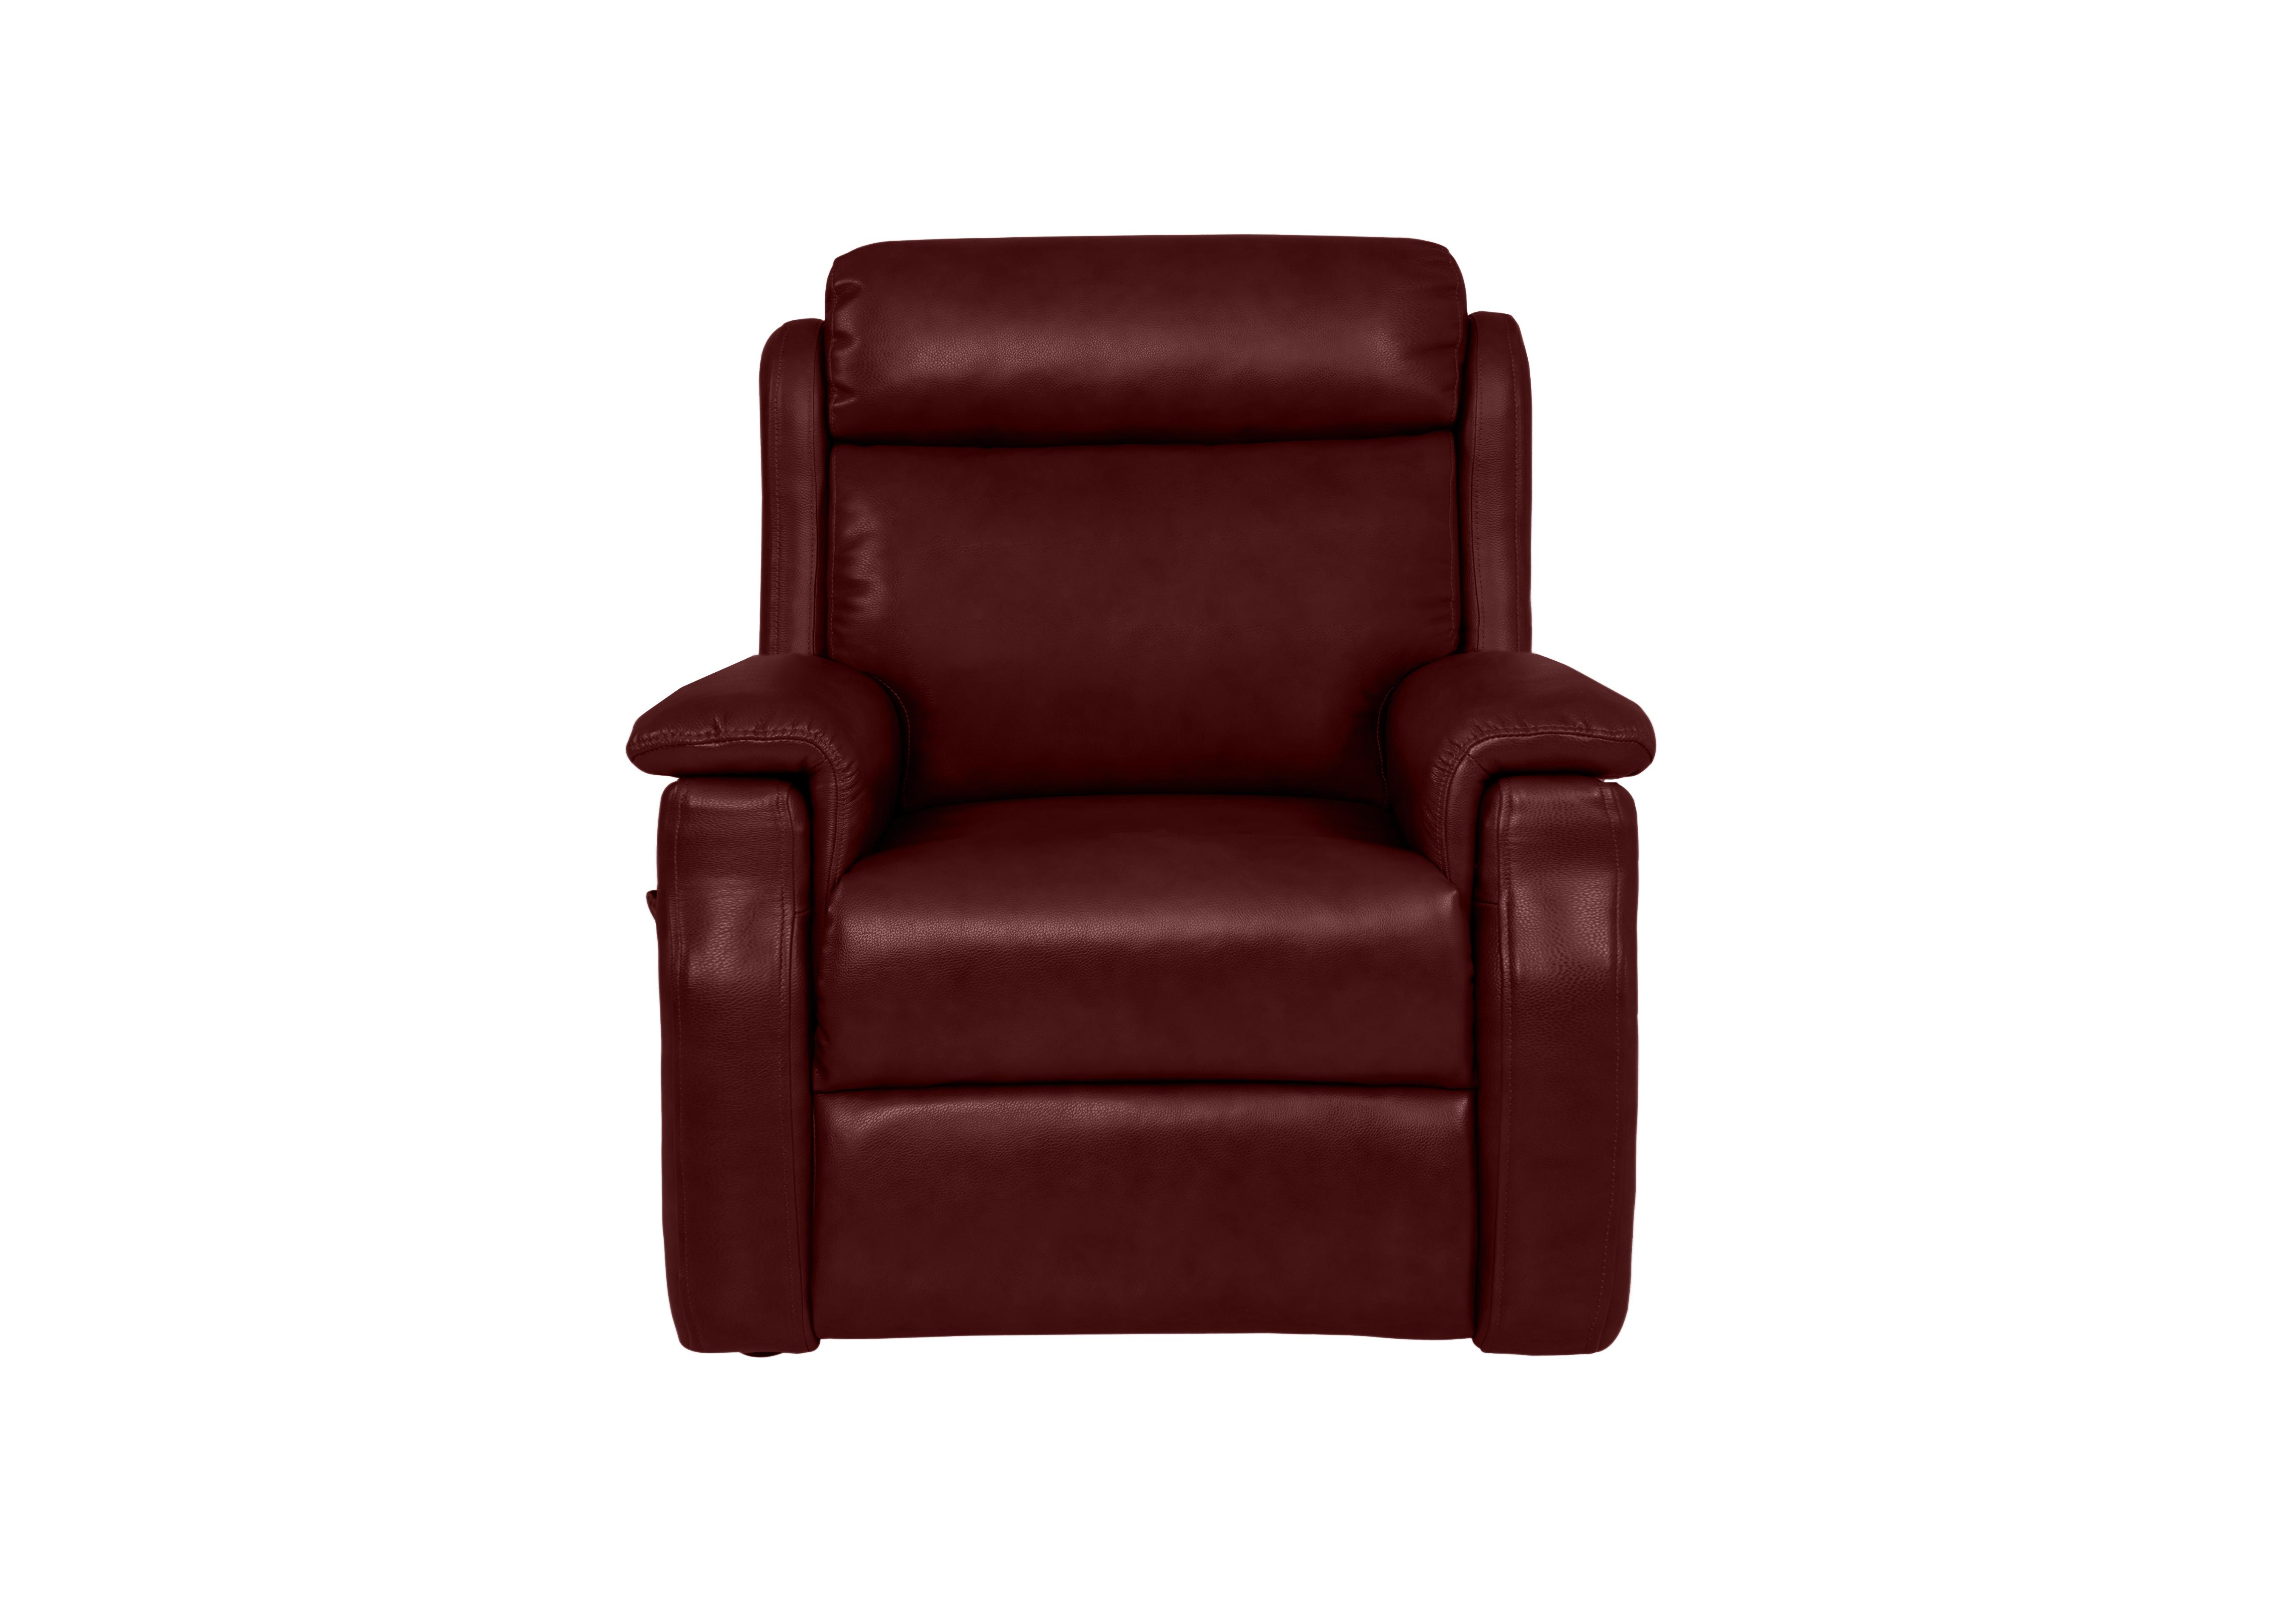 My Chair Kirk Leather Lift and Rise Chair in Cat-60/15 Montana Ruby on Furniture Village